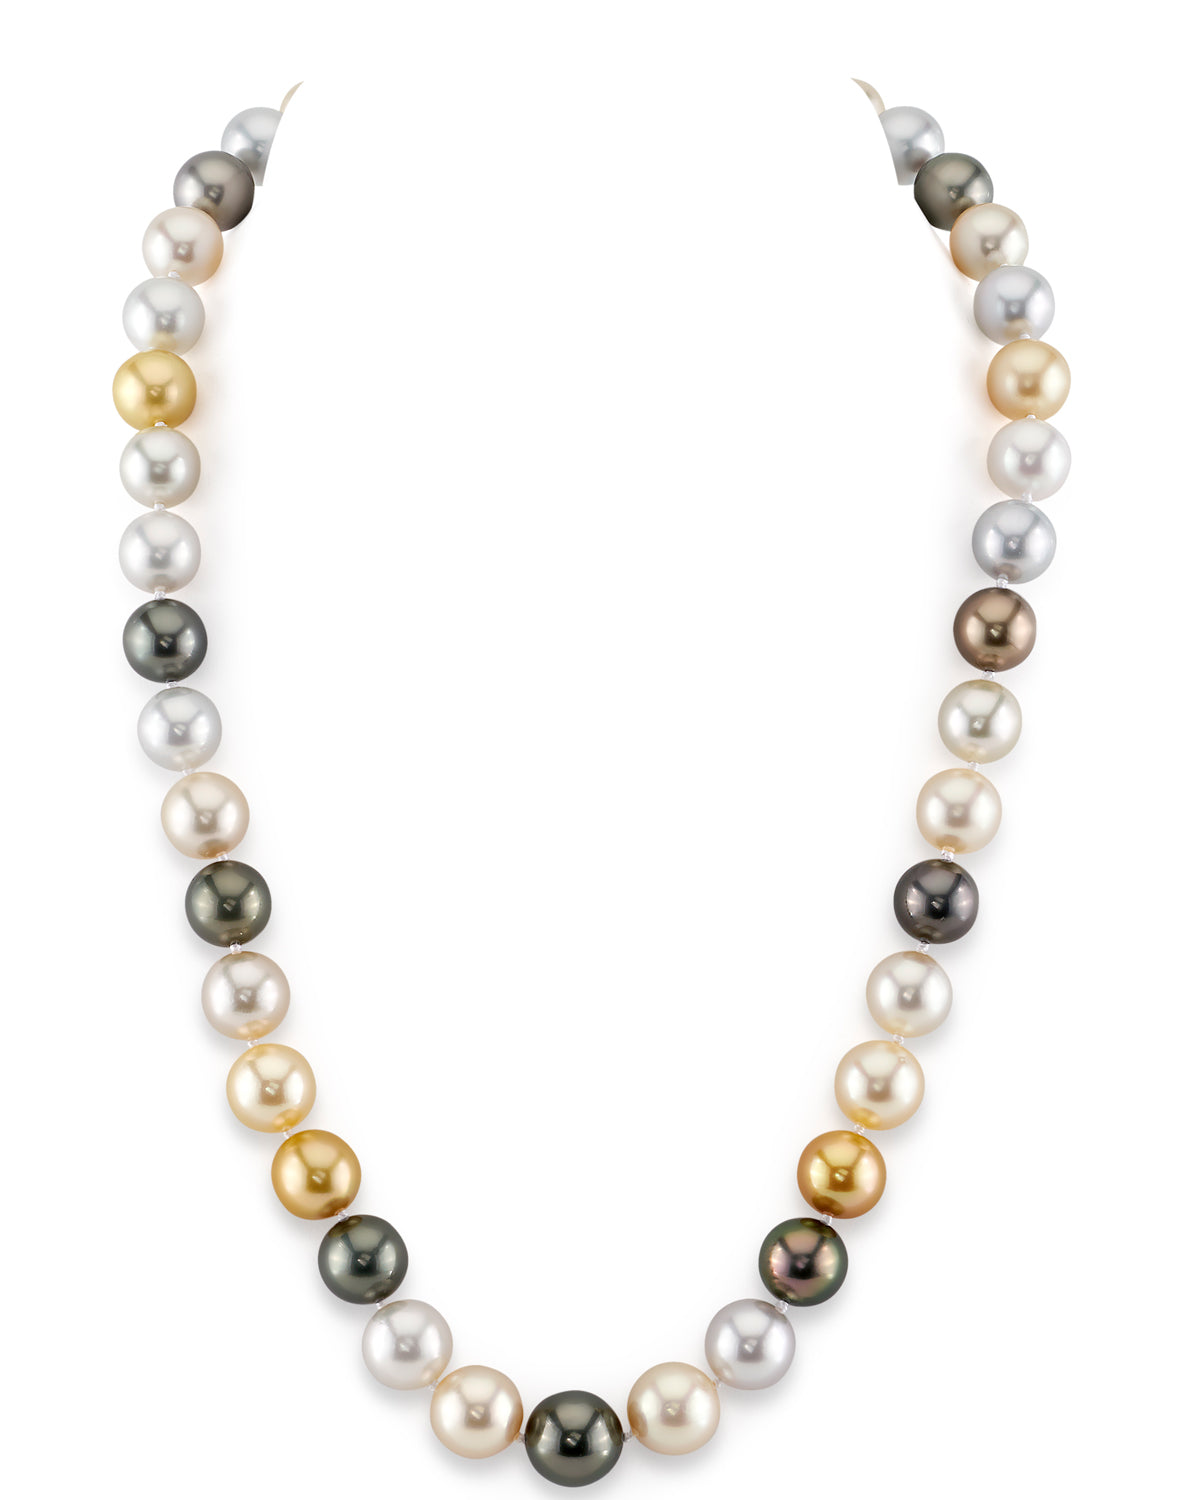 9-11mm South Sea Multicolor Pearl Necklace - AAAA Quality